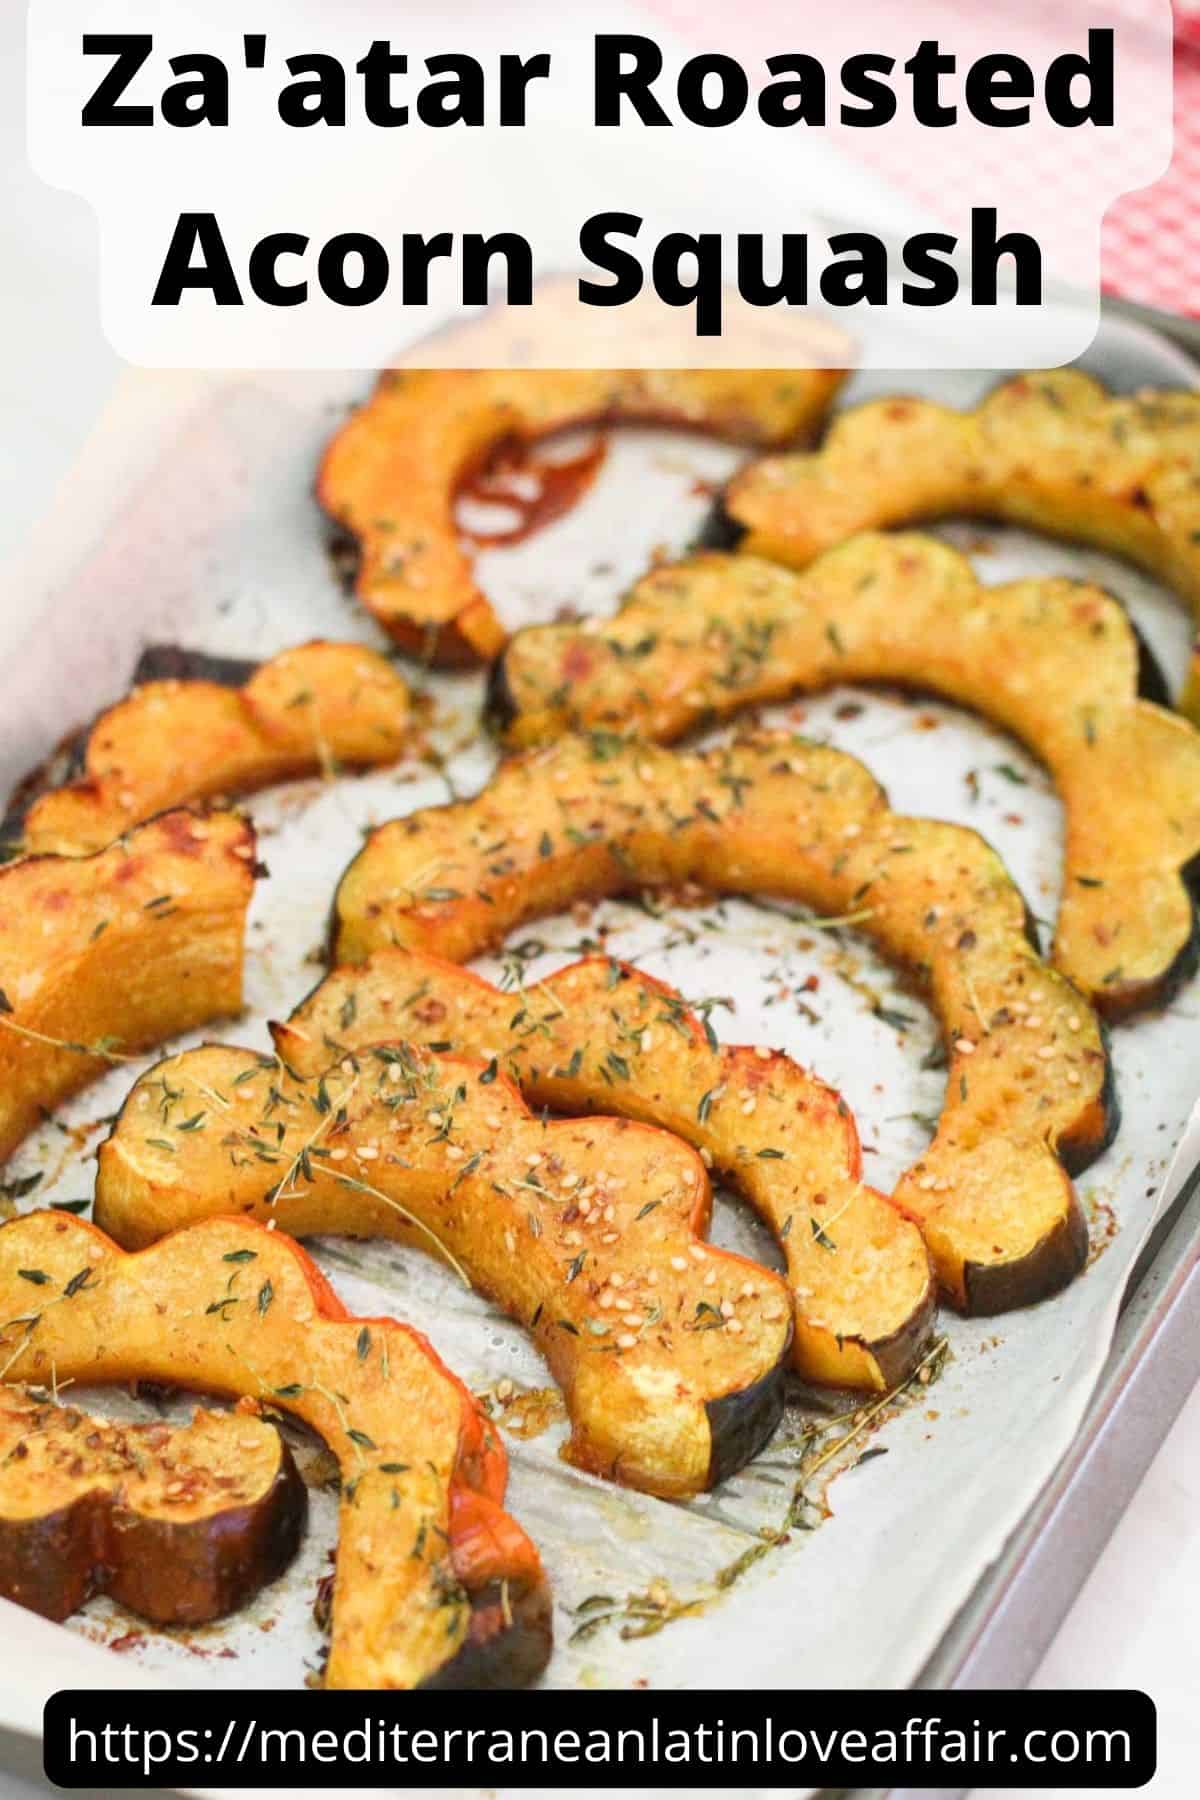 An image prepared for Pinterest. It shows roasted squash slices on a tray with lots of herbs. There's a title bar on top that reads Za'atar Roasted Acorn Squash and a website link on the bottom.